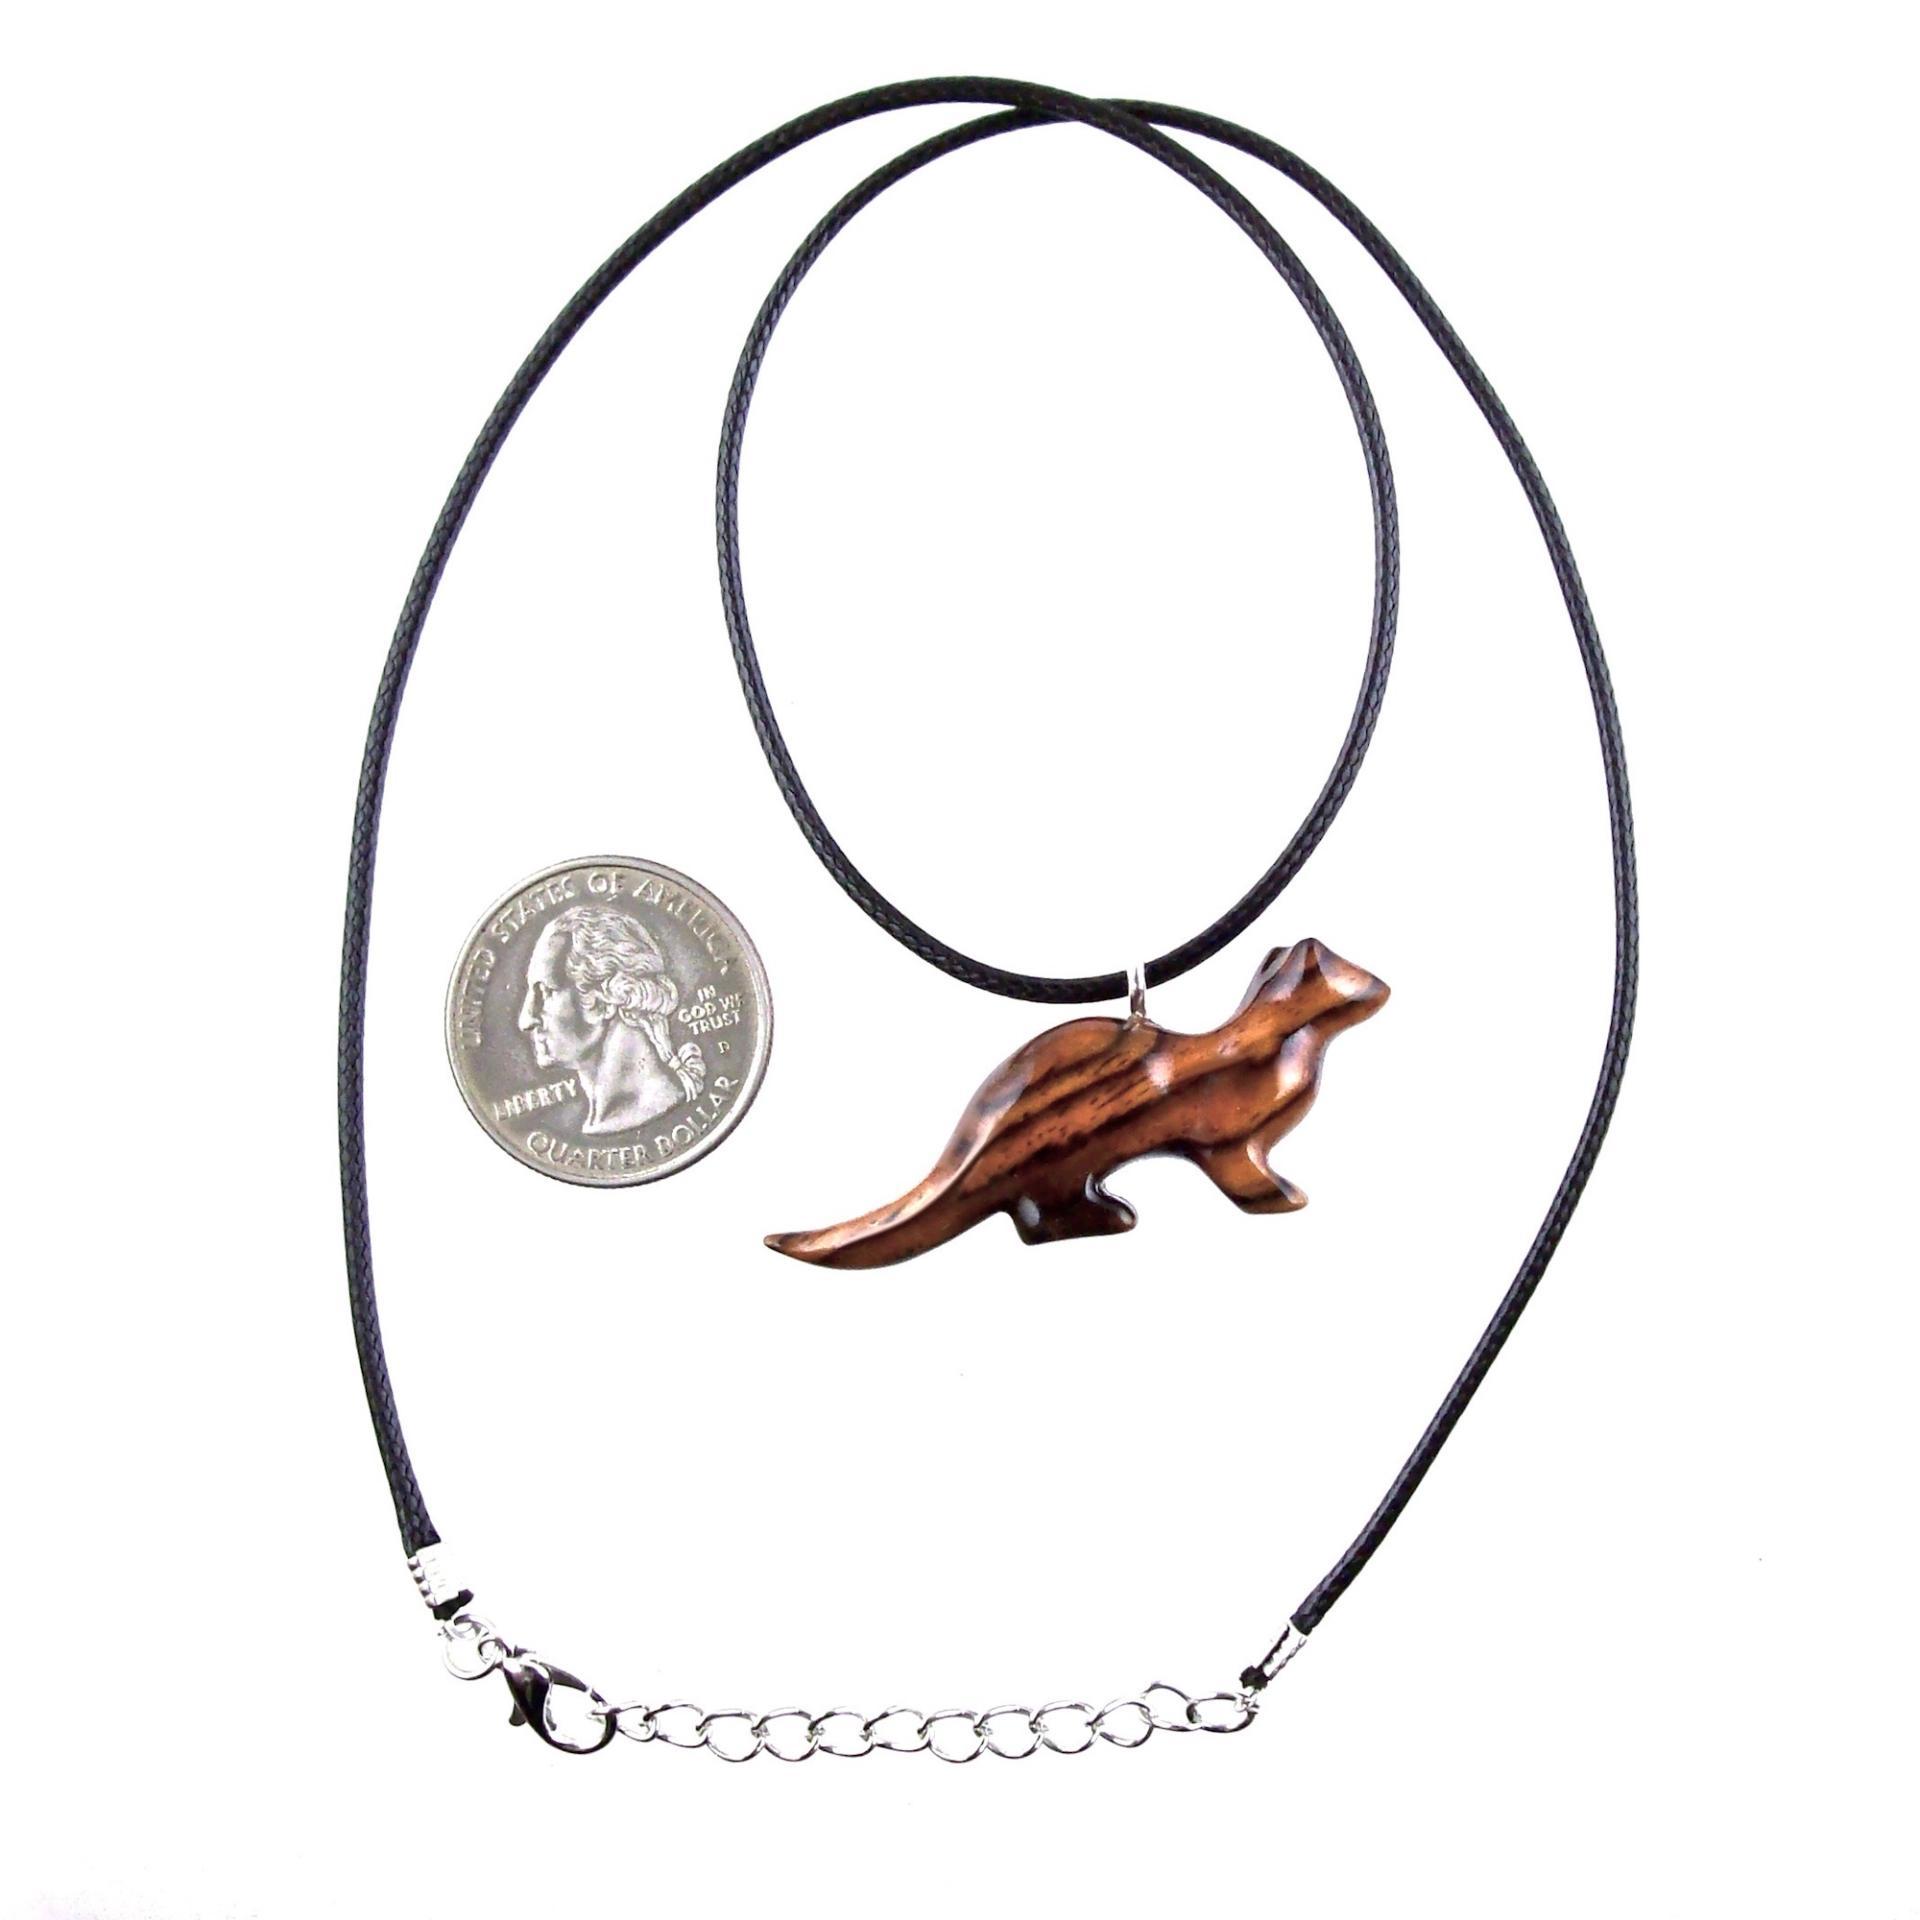 Otter Necklace, Hand Carved Wooden Sea Animal Pendant, Nautical Wood Jewelry for Men or Women